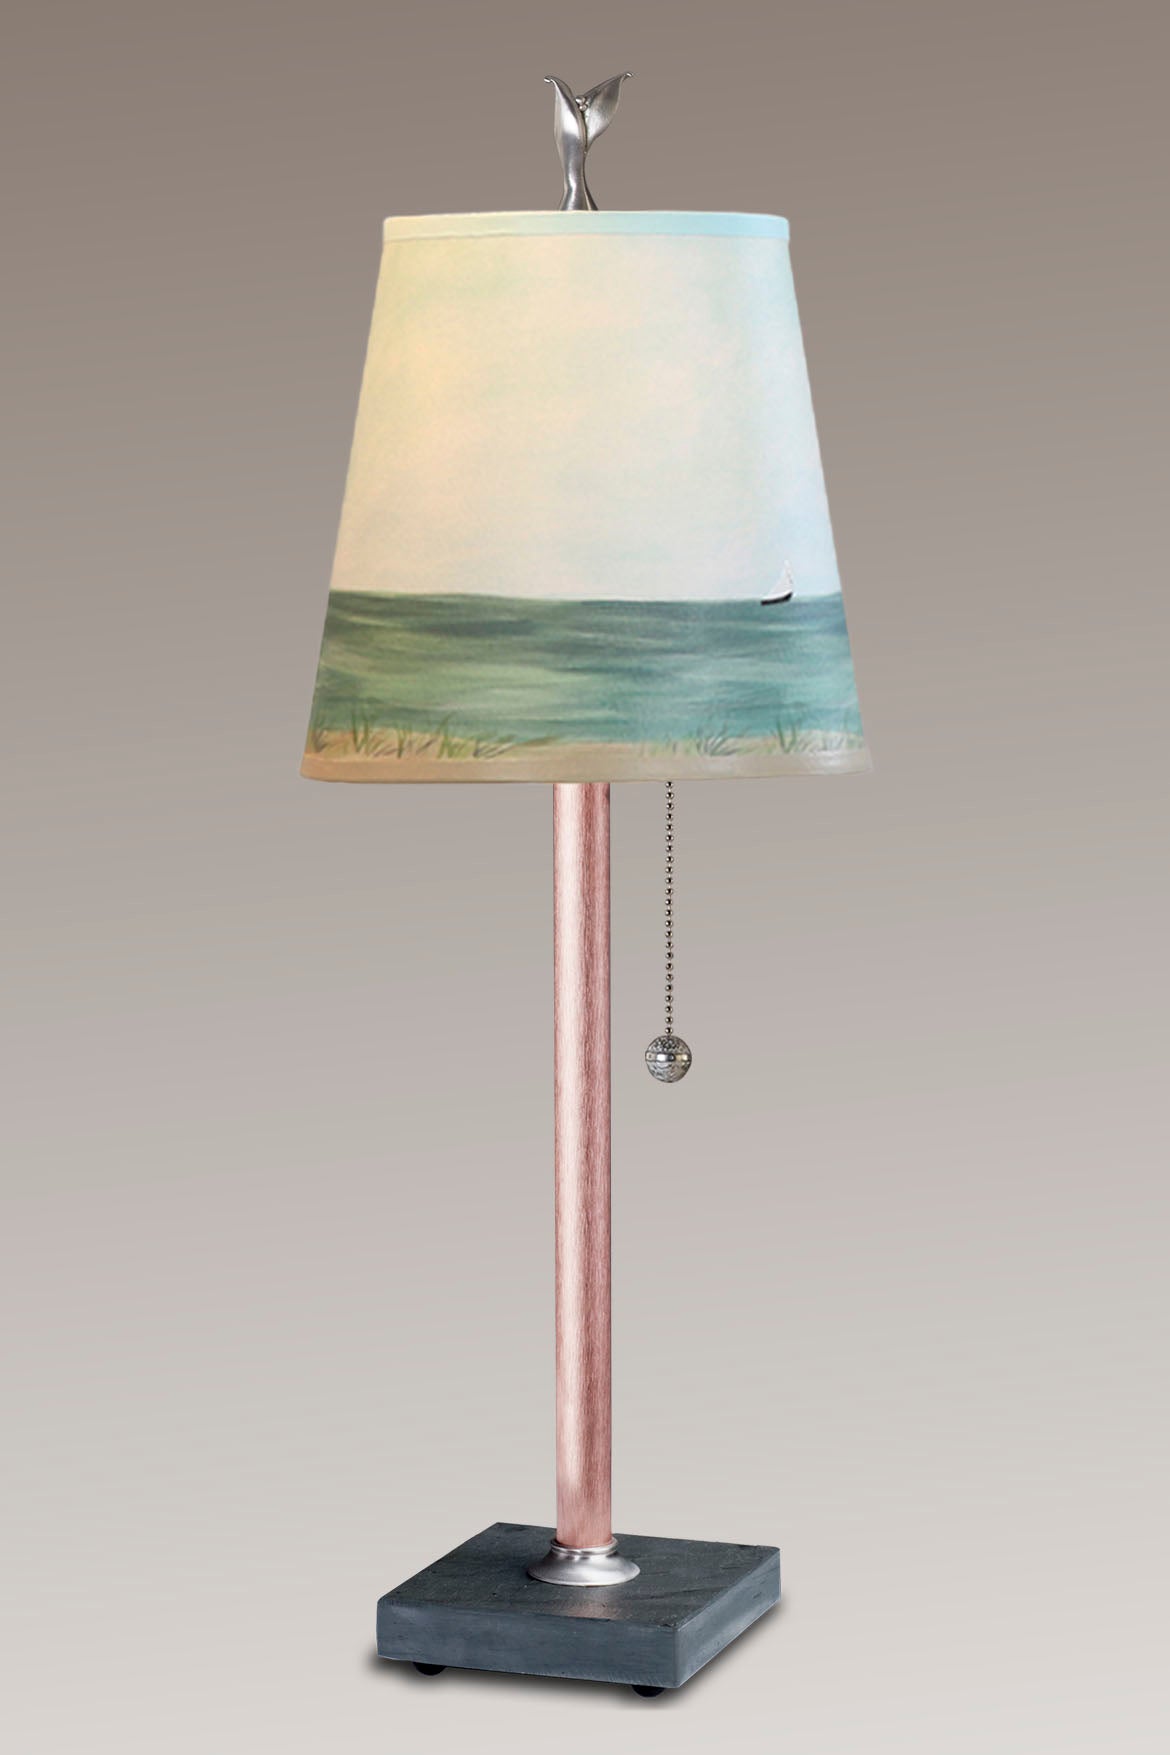 Janna Ugone &amp; Co Table Lamps Copper Table Lamp with Small Drum Shade in Shore